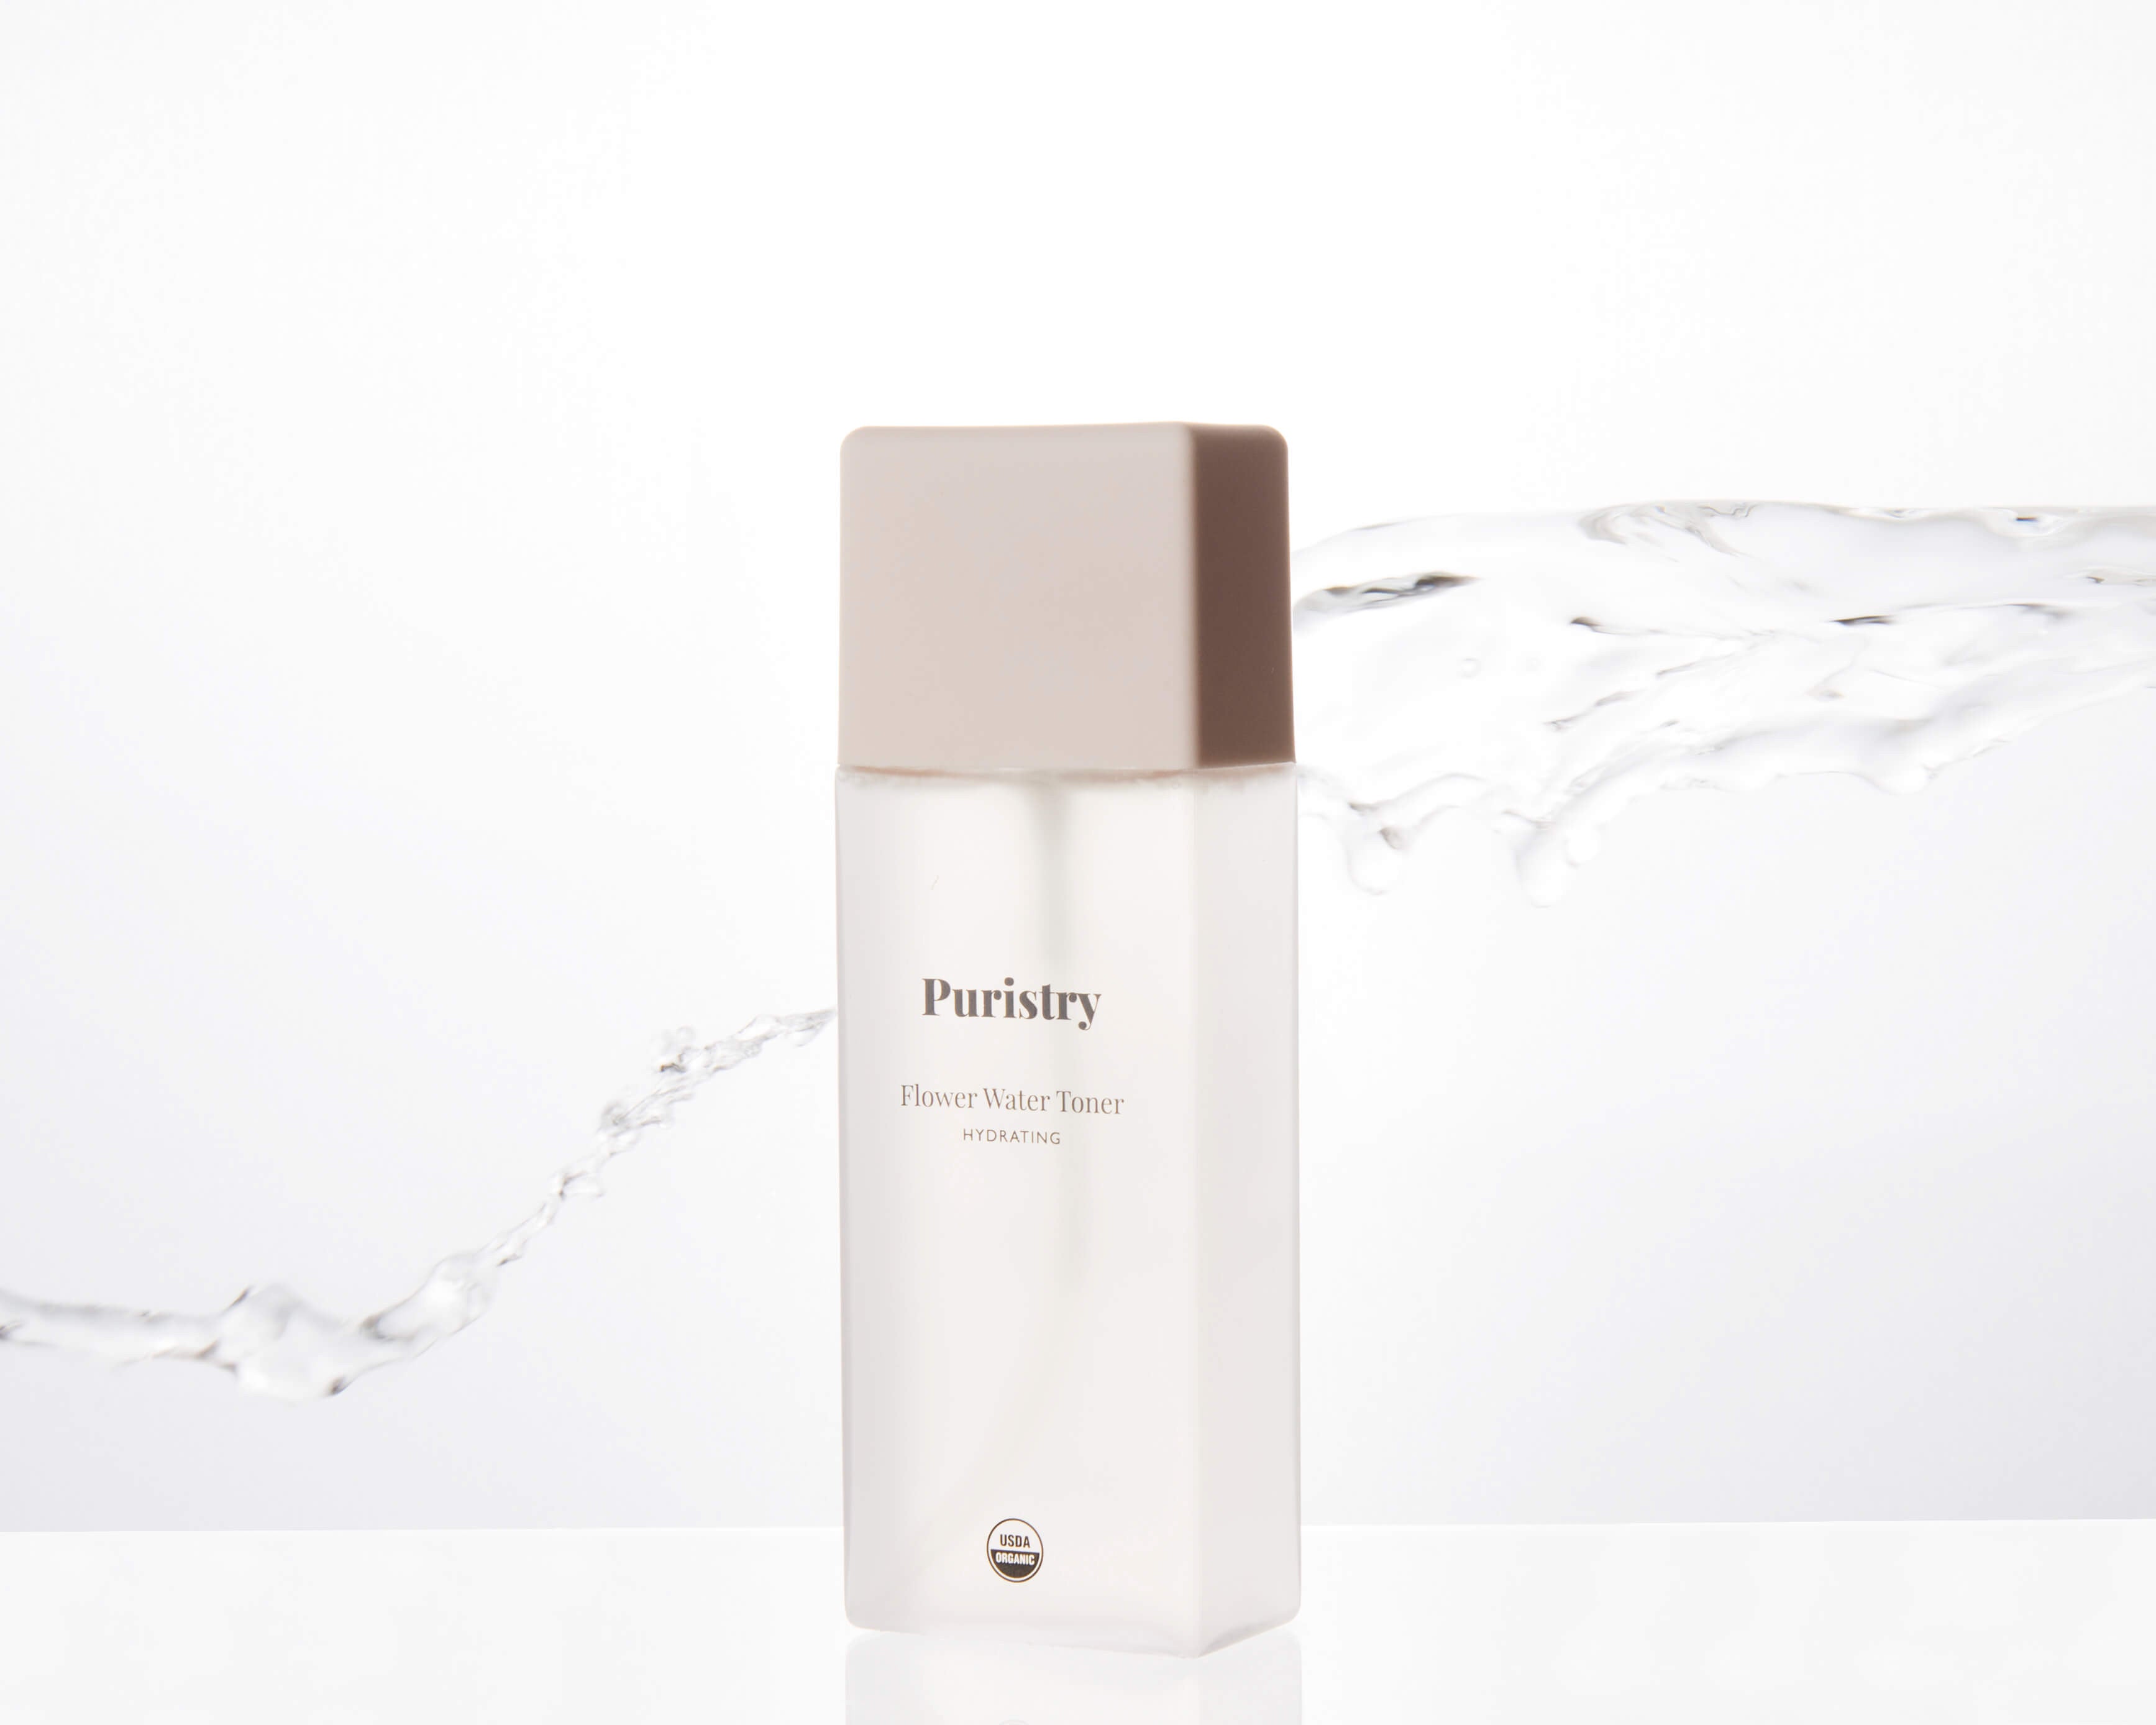 Puristry Flower Water Hydration Product